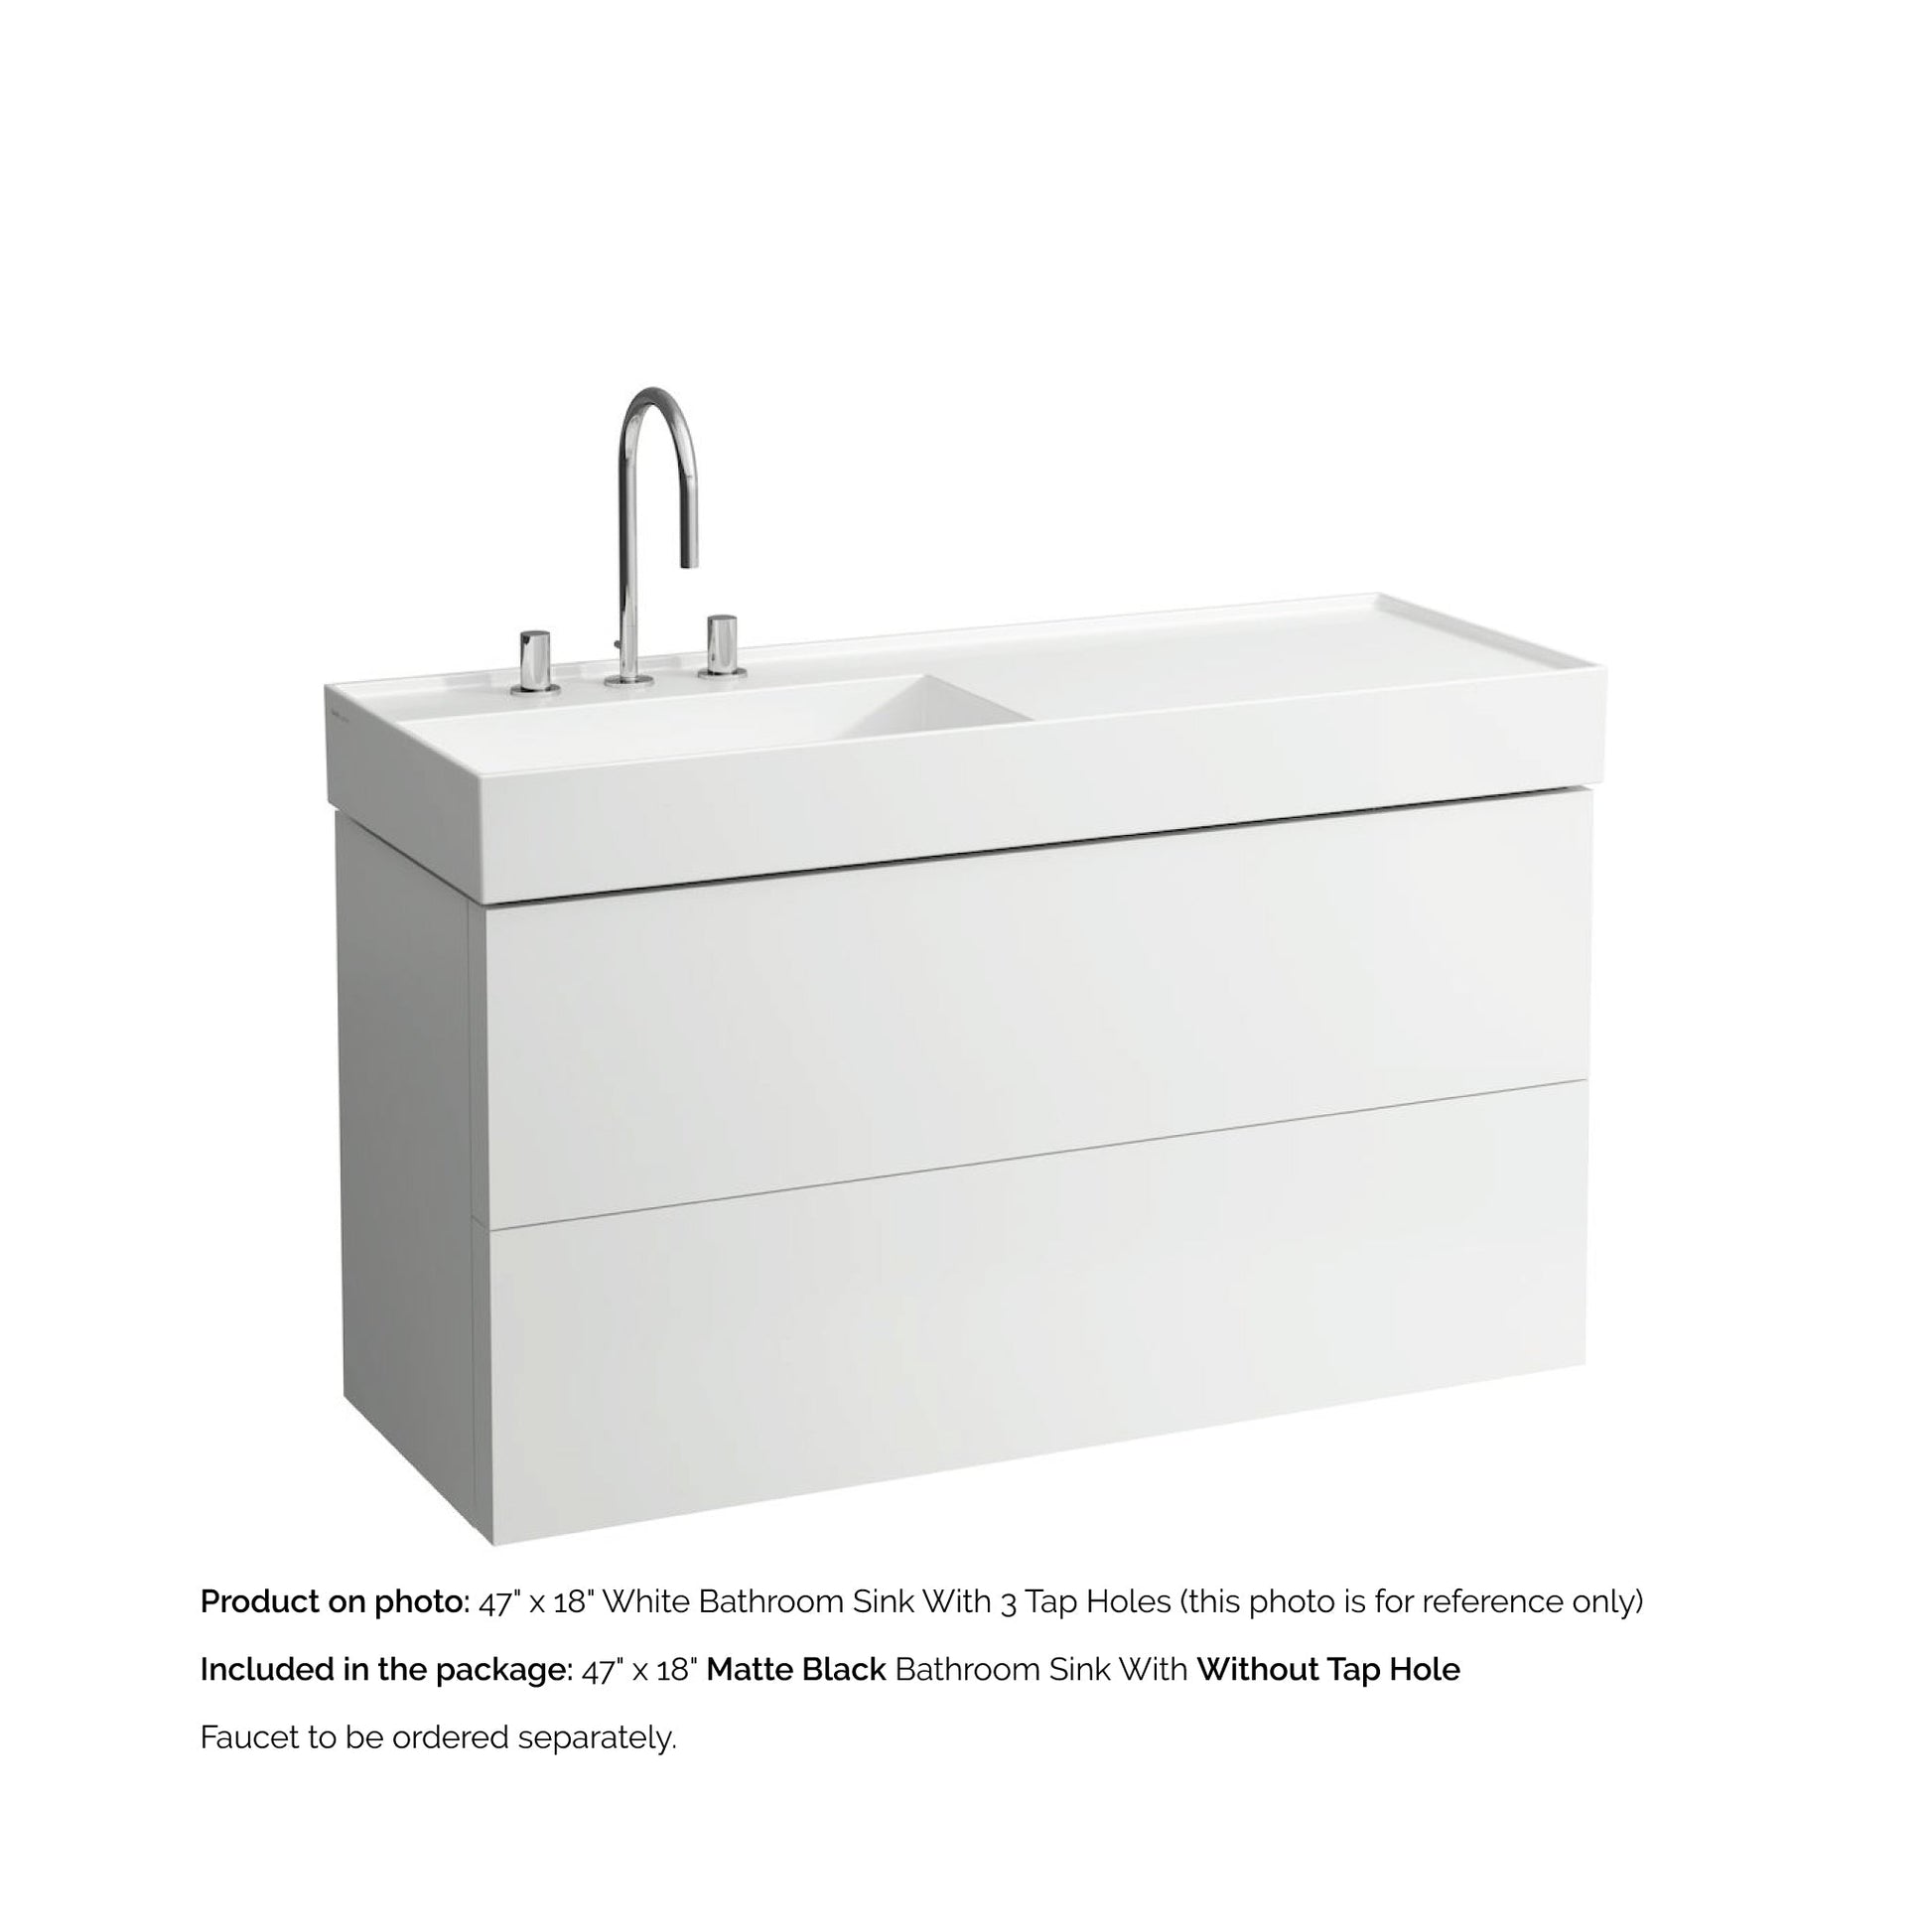 Laufen Kartell 47" x 18" Matte Black Wall-Mounted Shelf-Right Bathroom Sink Without Faucet Hole